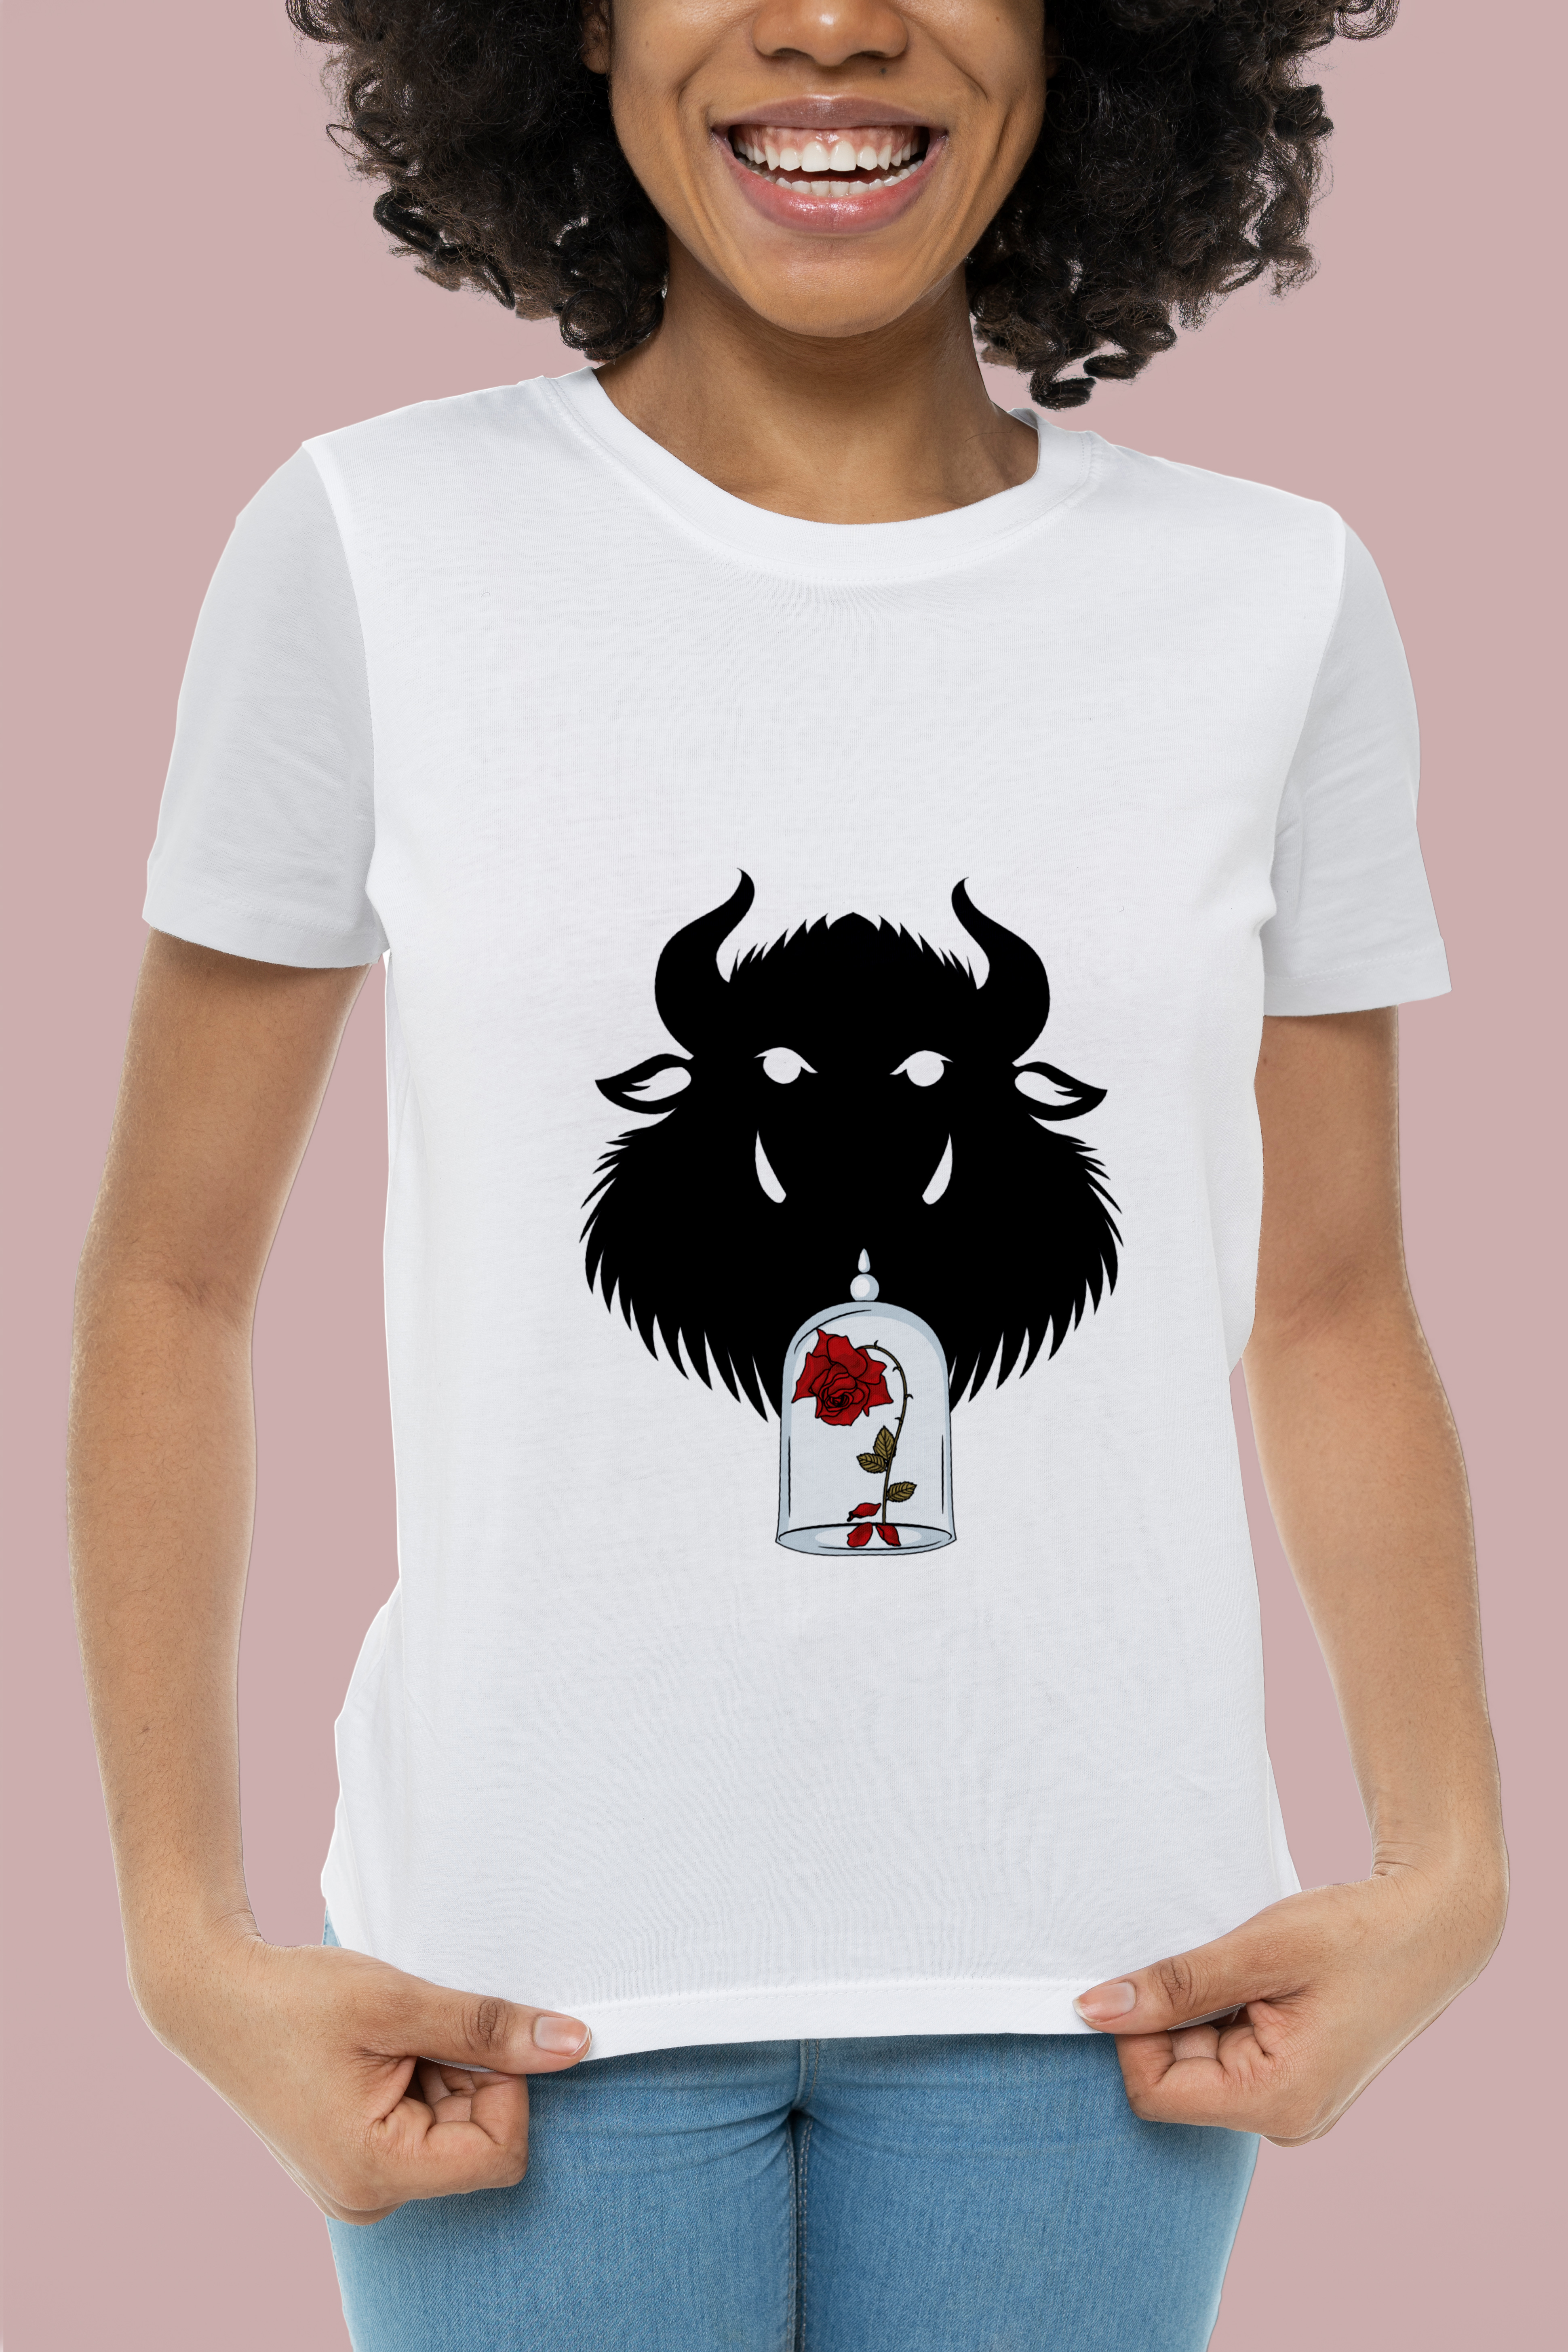 Black silhouette bull image with rose tag.